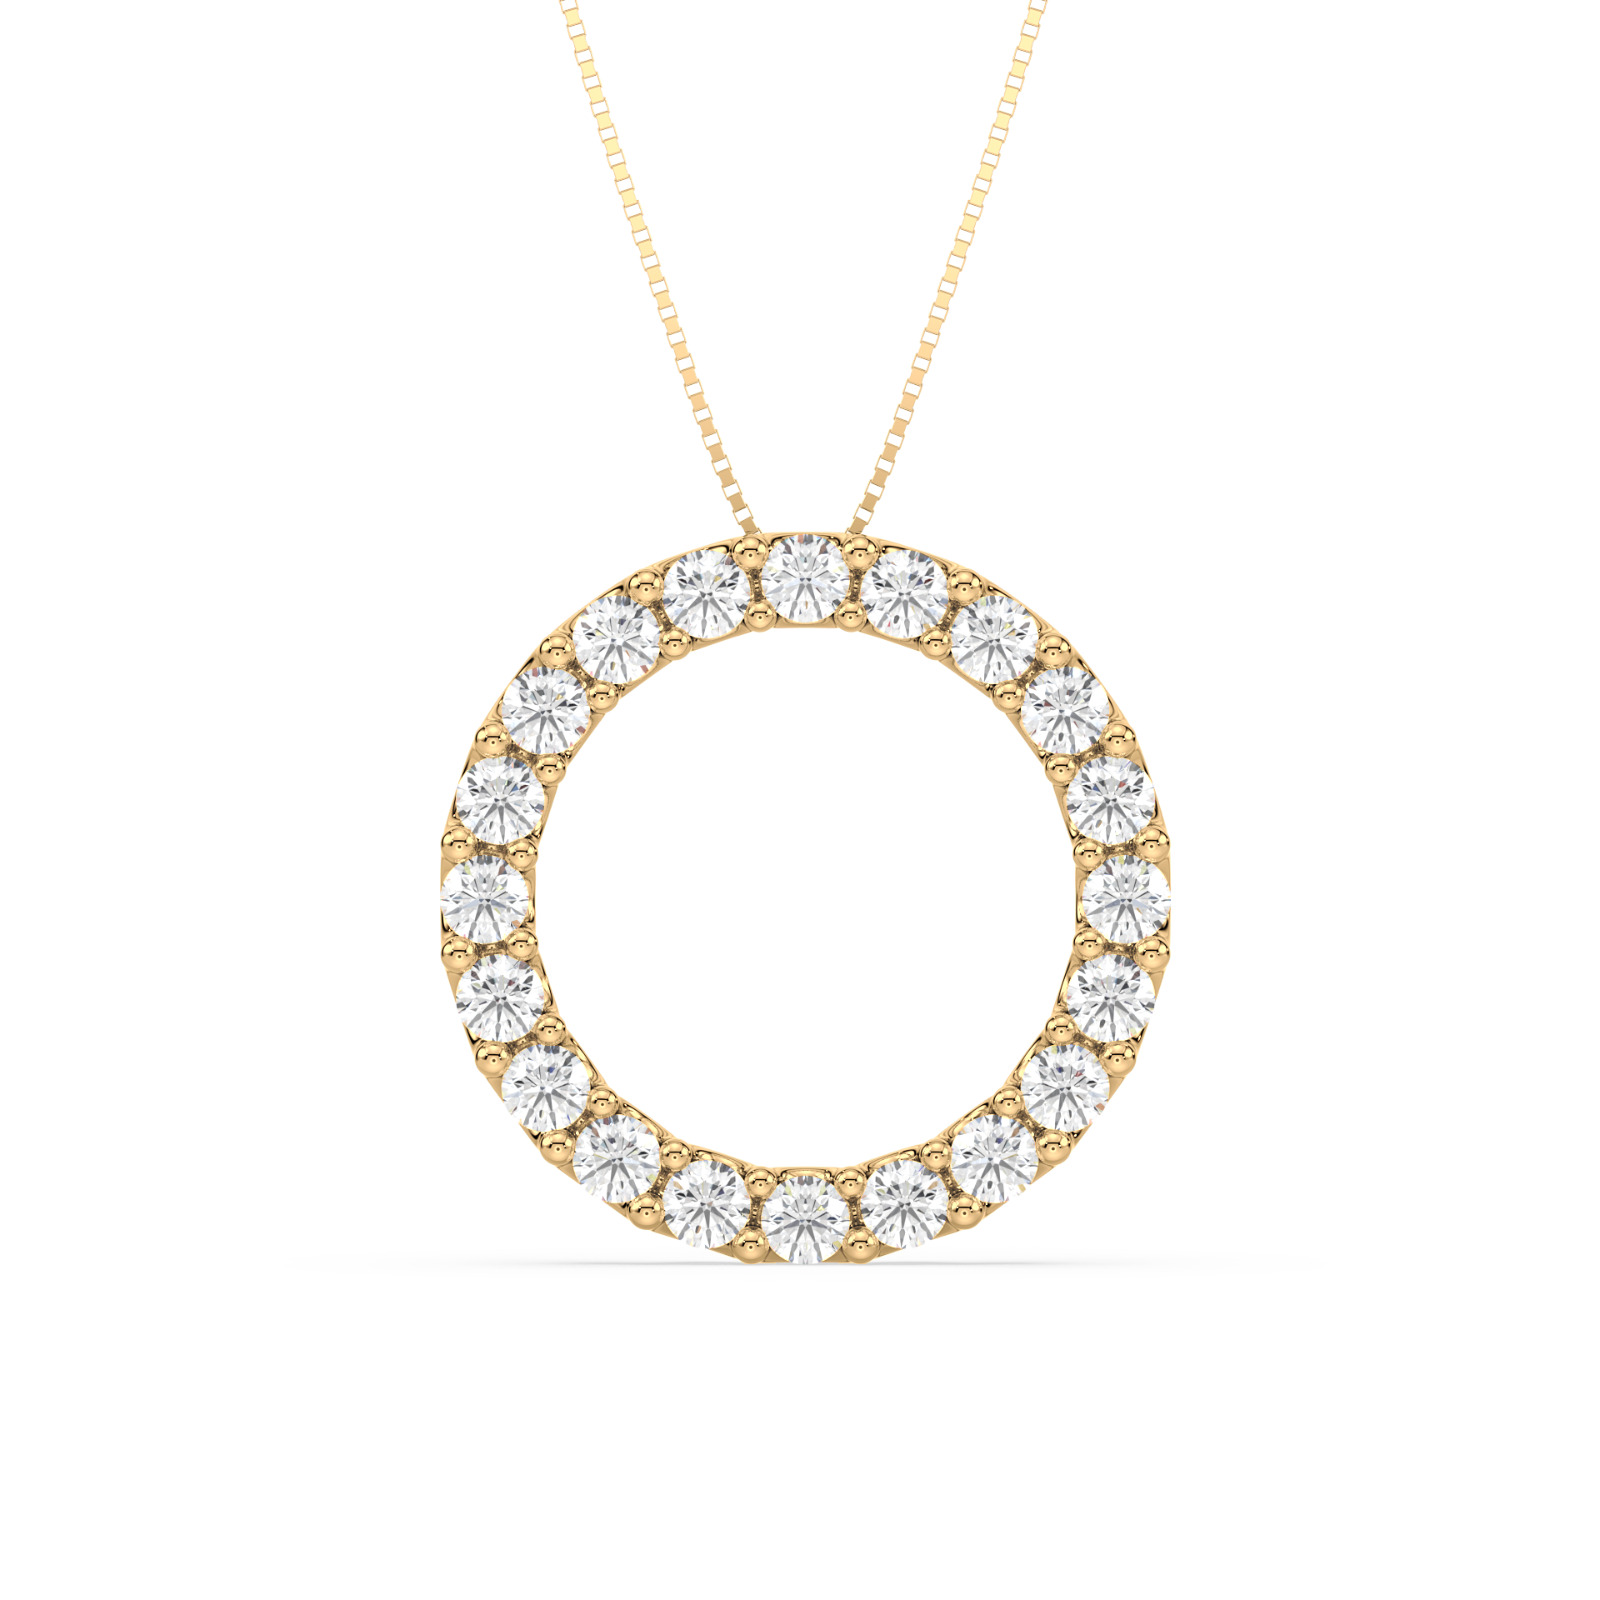 CIRCLE OF LIFE PENDANT NECKLACE IN 14K GOLD WITH LAB GROWN DIAMONDS (2.00 CTW)